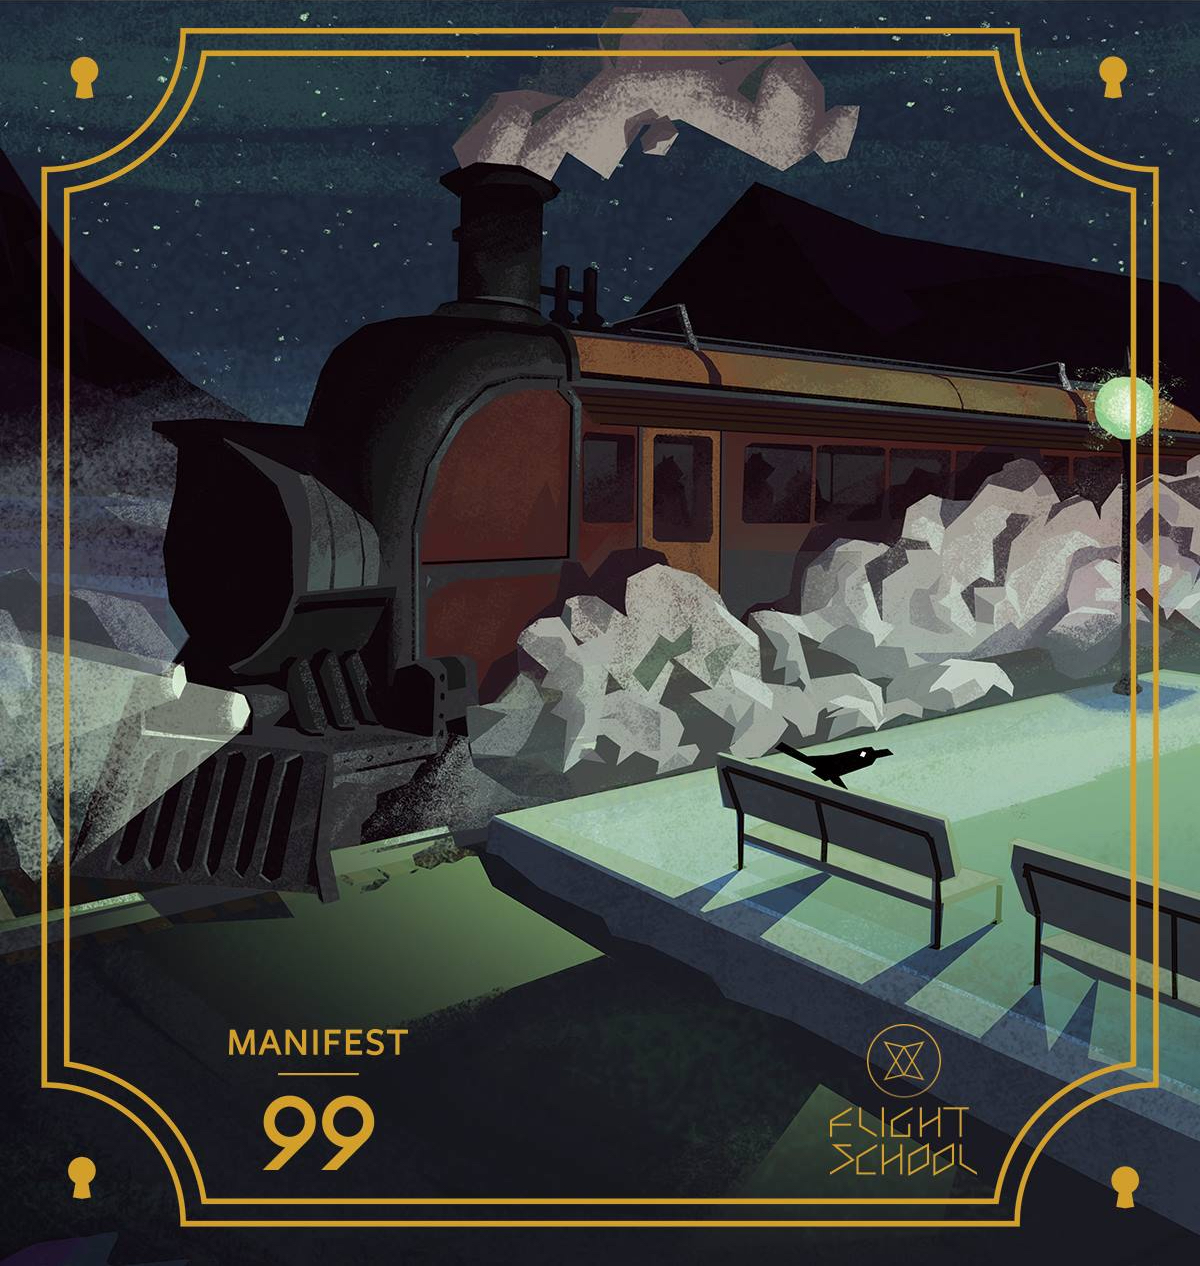 Flight School Takes Viewers on an Ominous VR Train Journey in Manifest 99